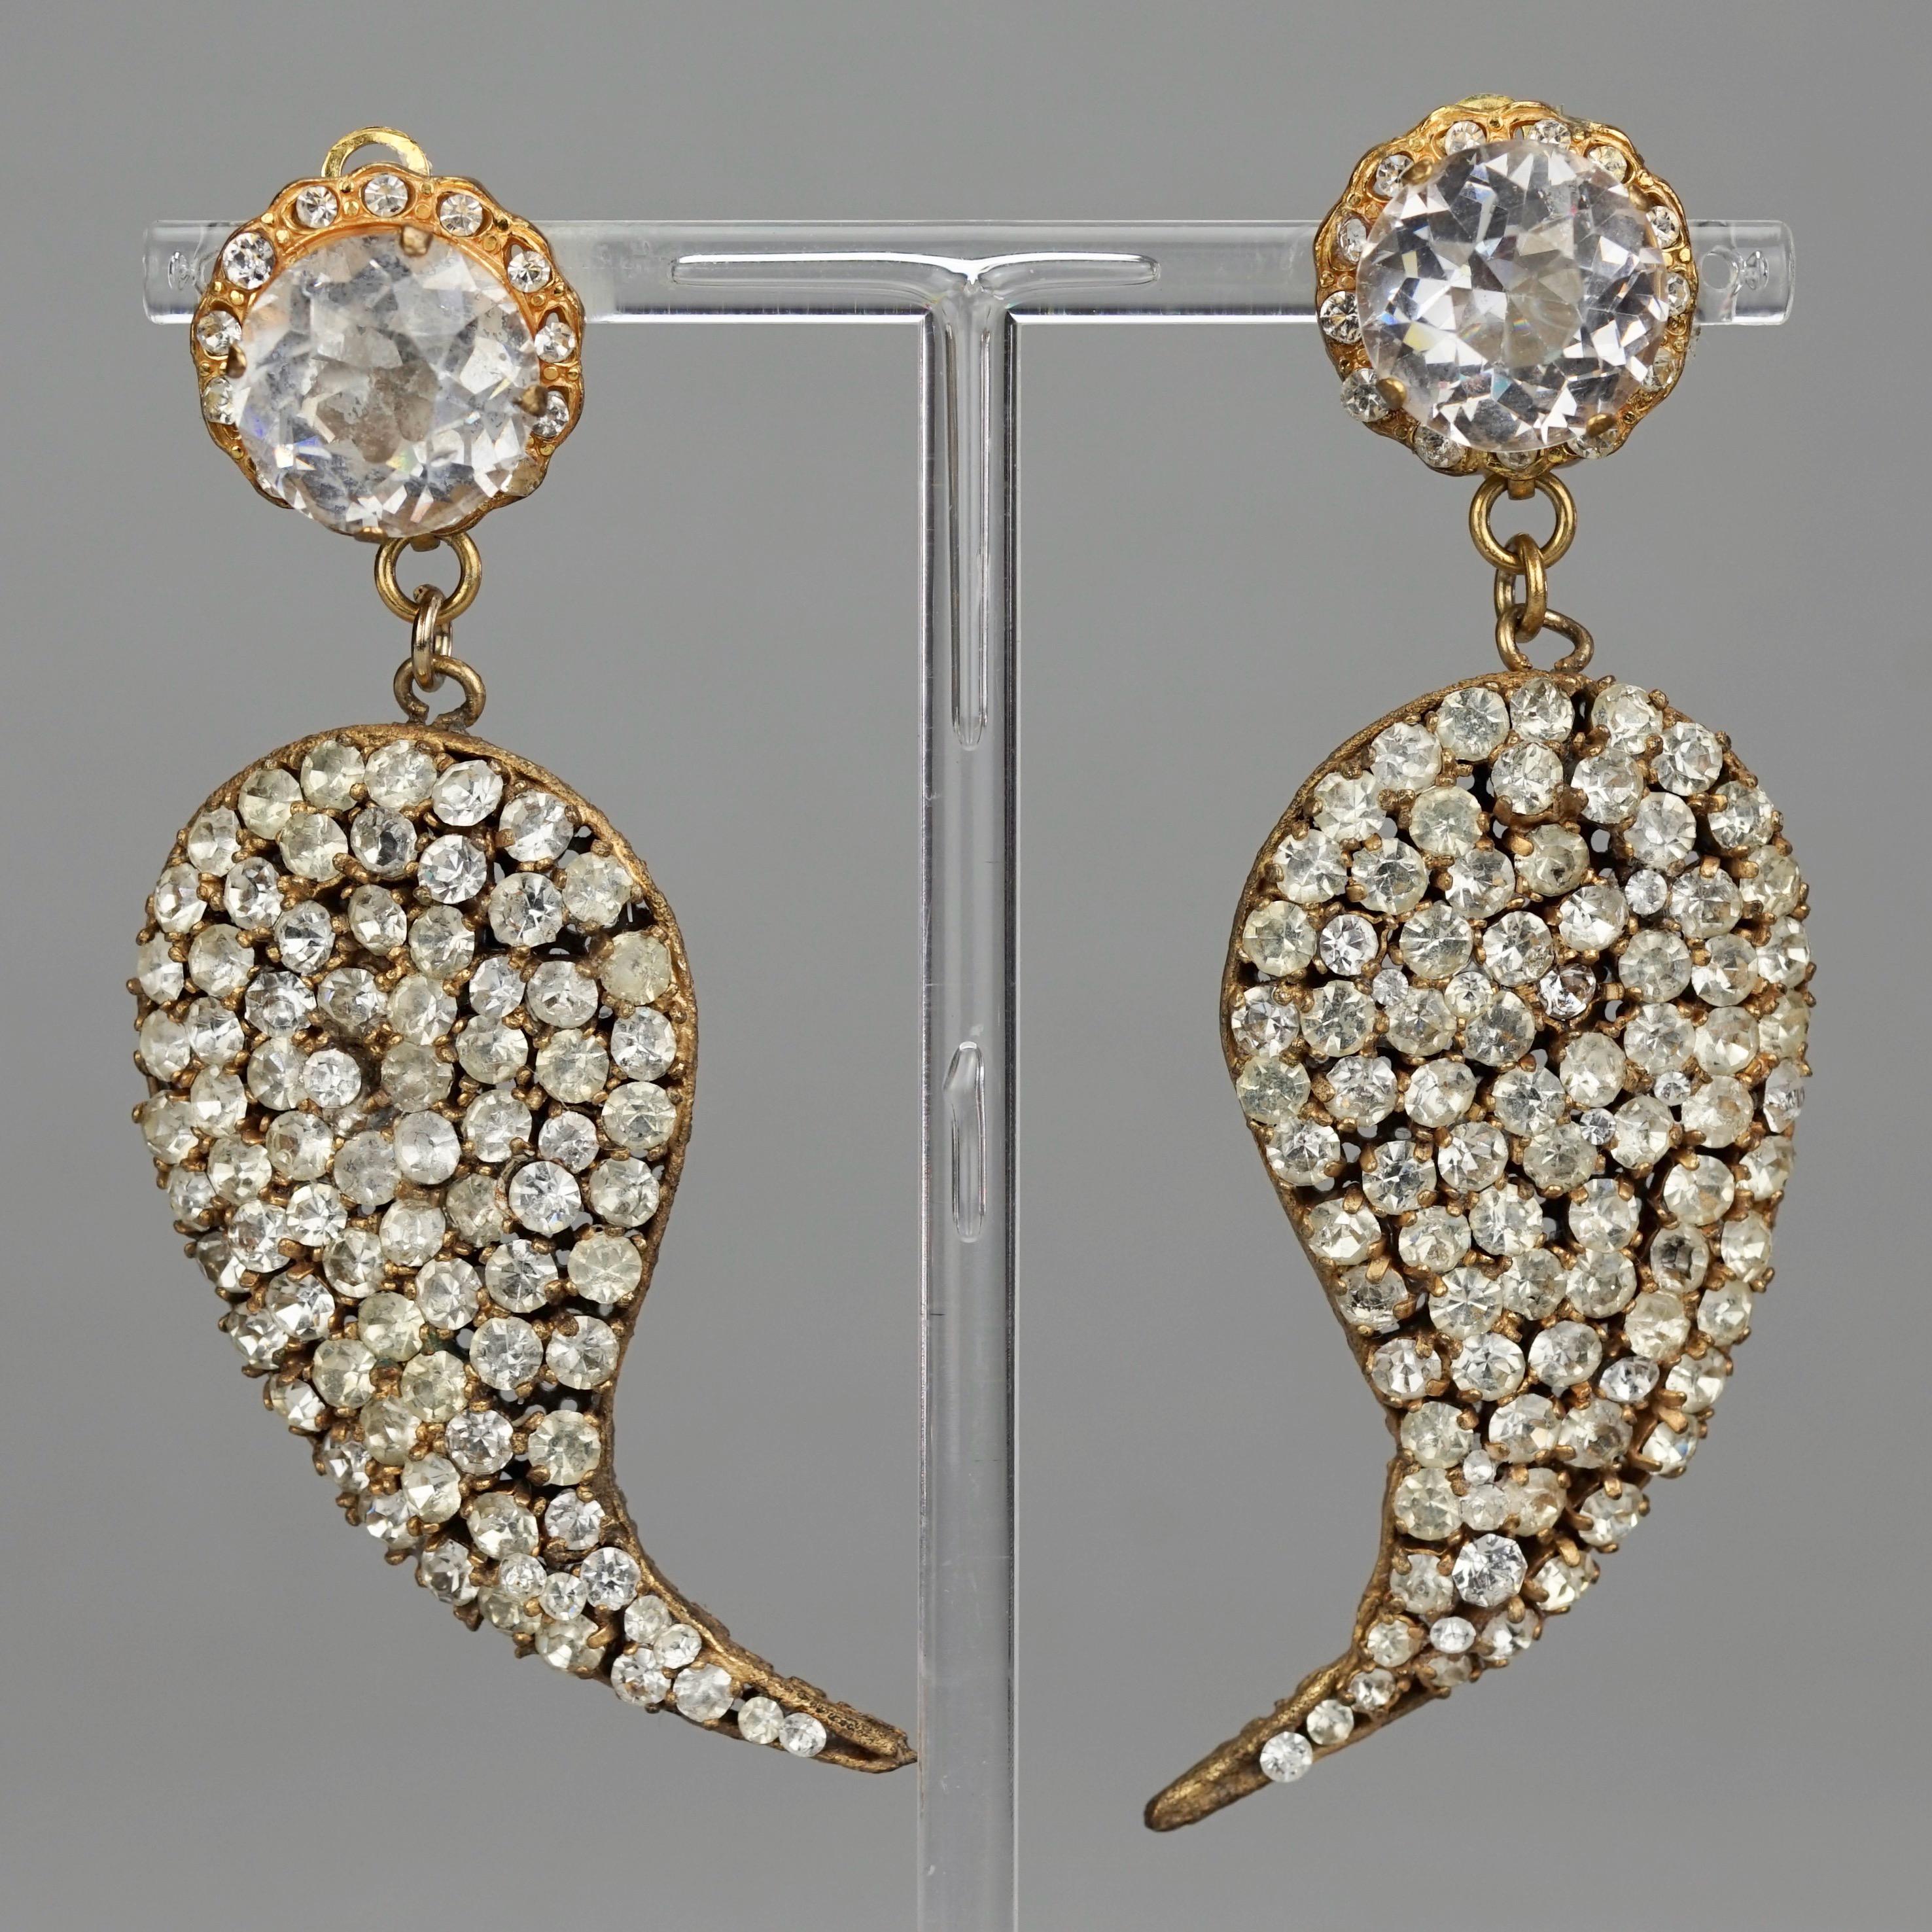 Vintage 1960s Massive Art Deco Rhinestone Dangling Earrings In Excellent Condition For Sale In Kingersheim, Alsace